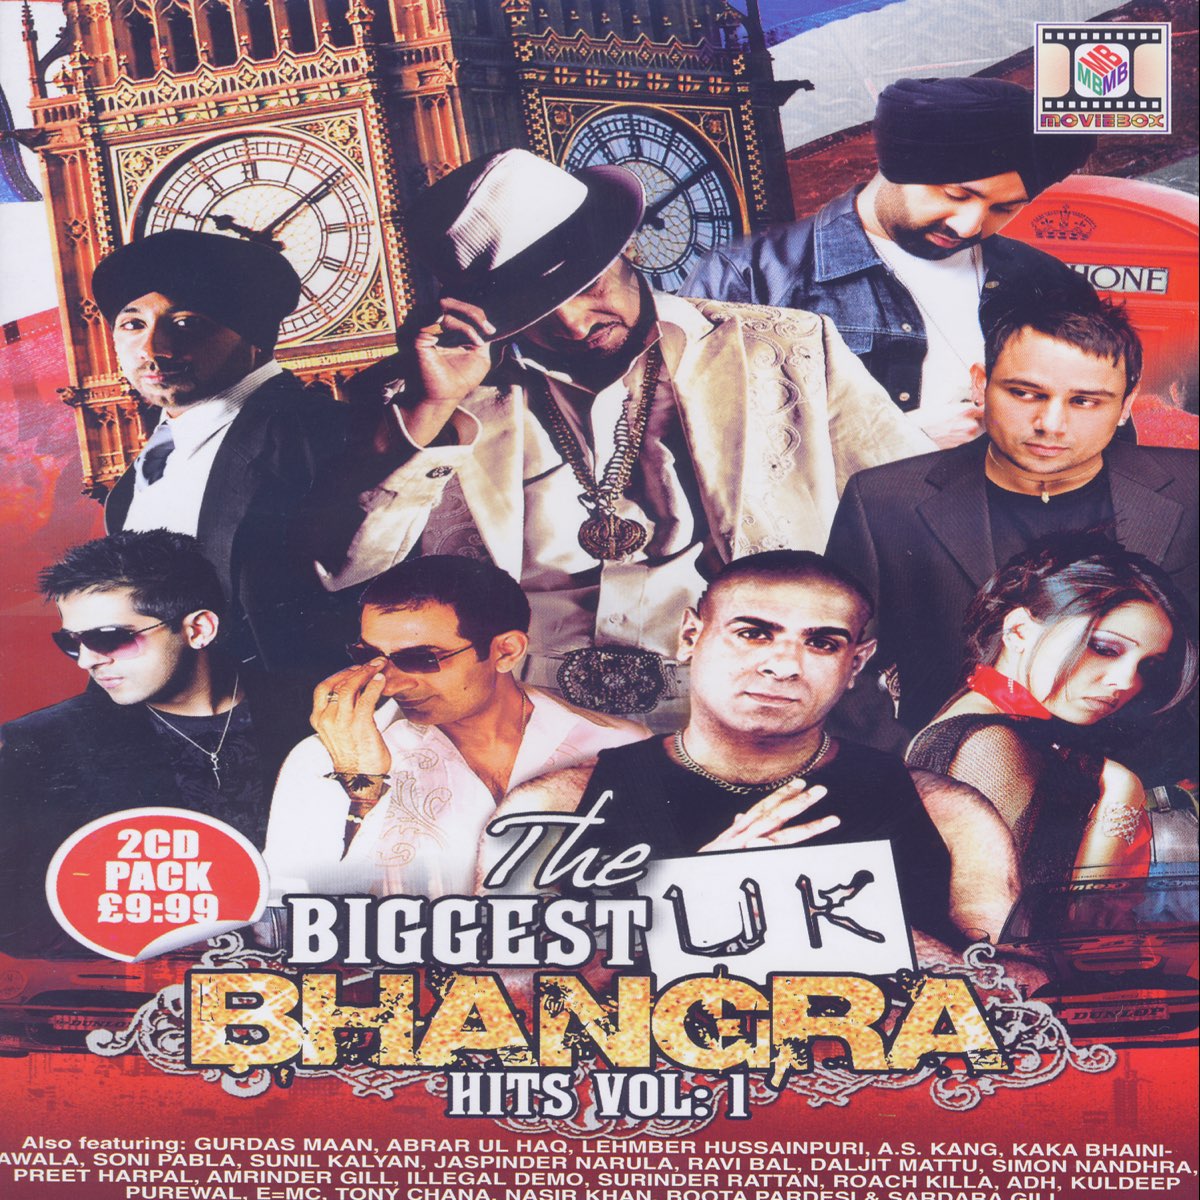 The Biggest UK Bhangra Hits, Vol. 1 - Album by Various Artists